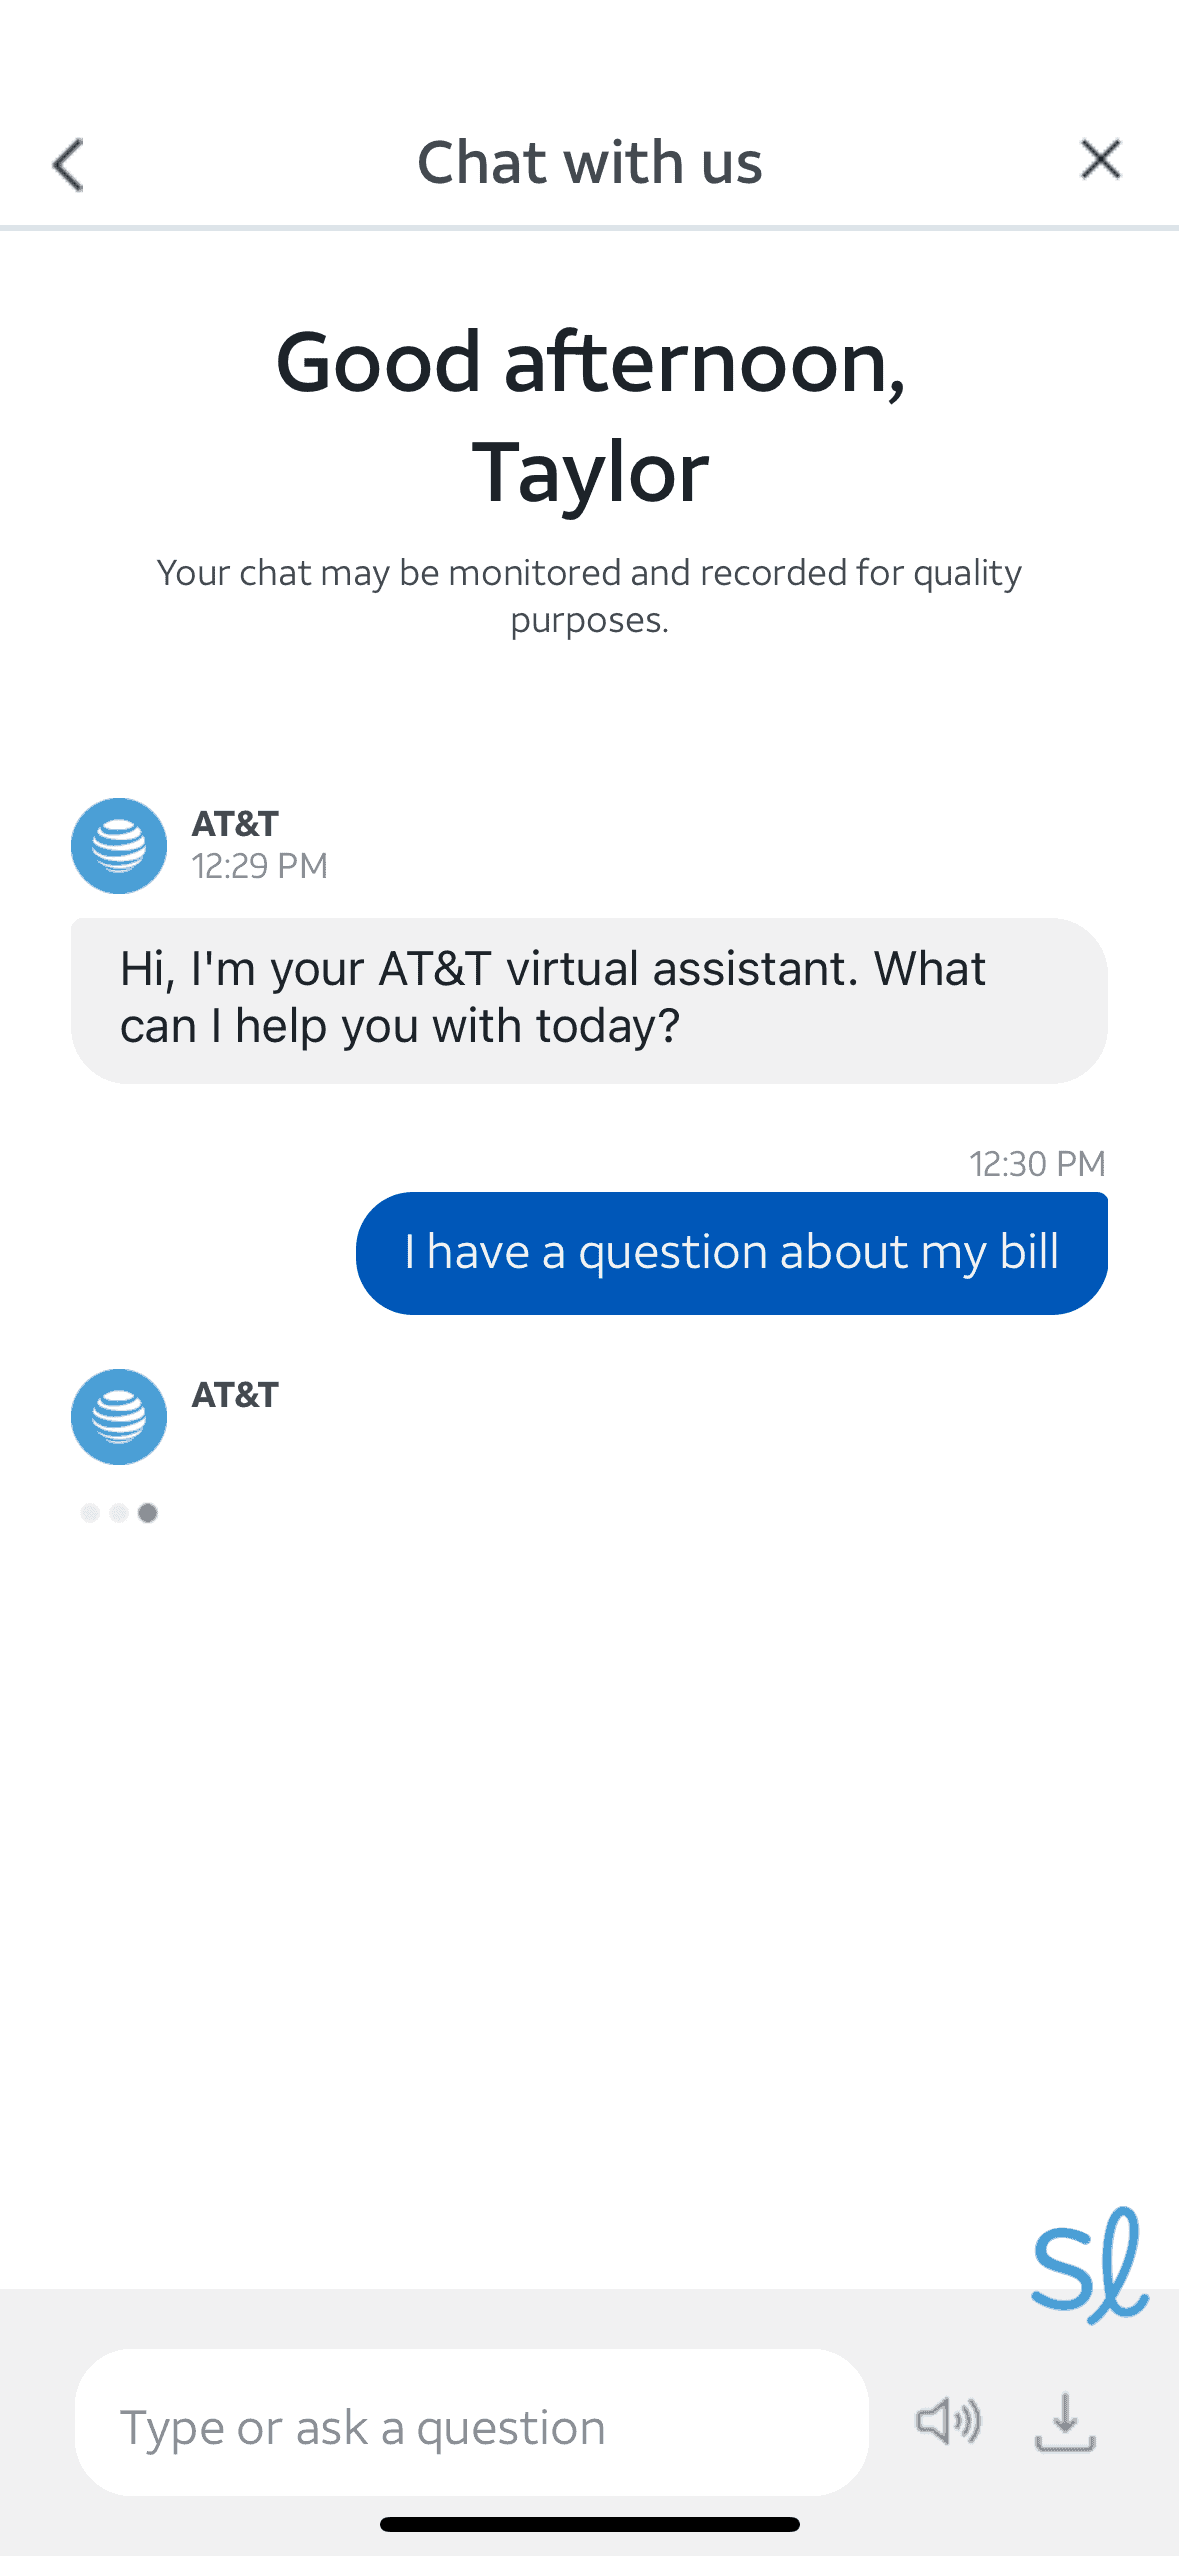 AT&T offers an online chat feature that I often use to get my questions answered quickly.